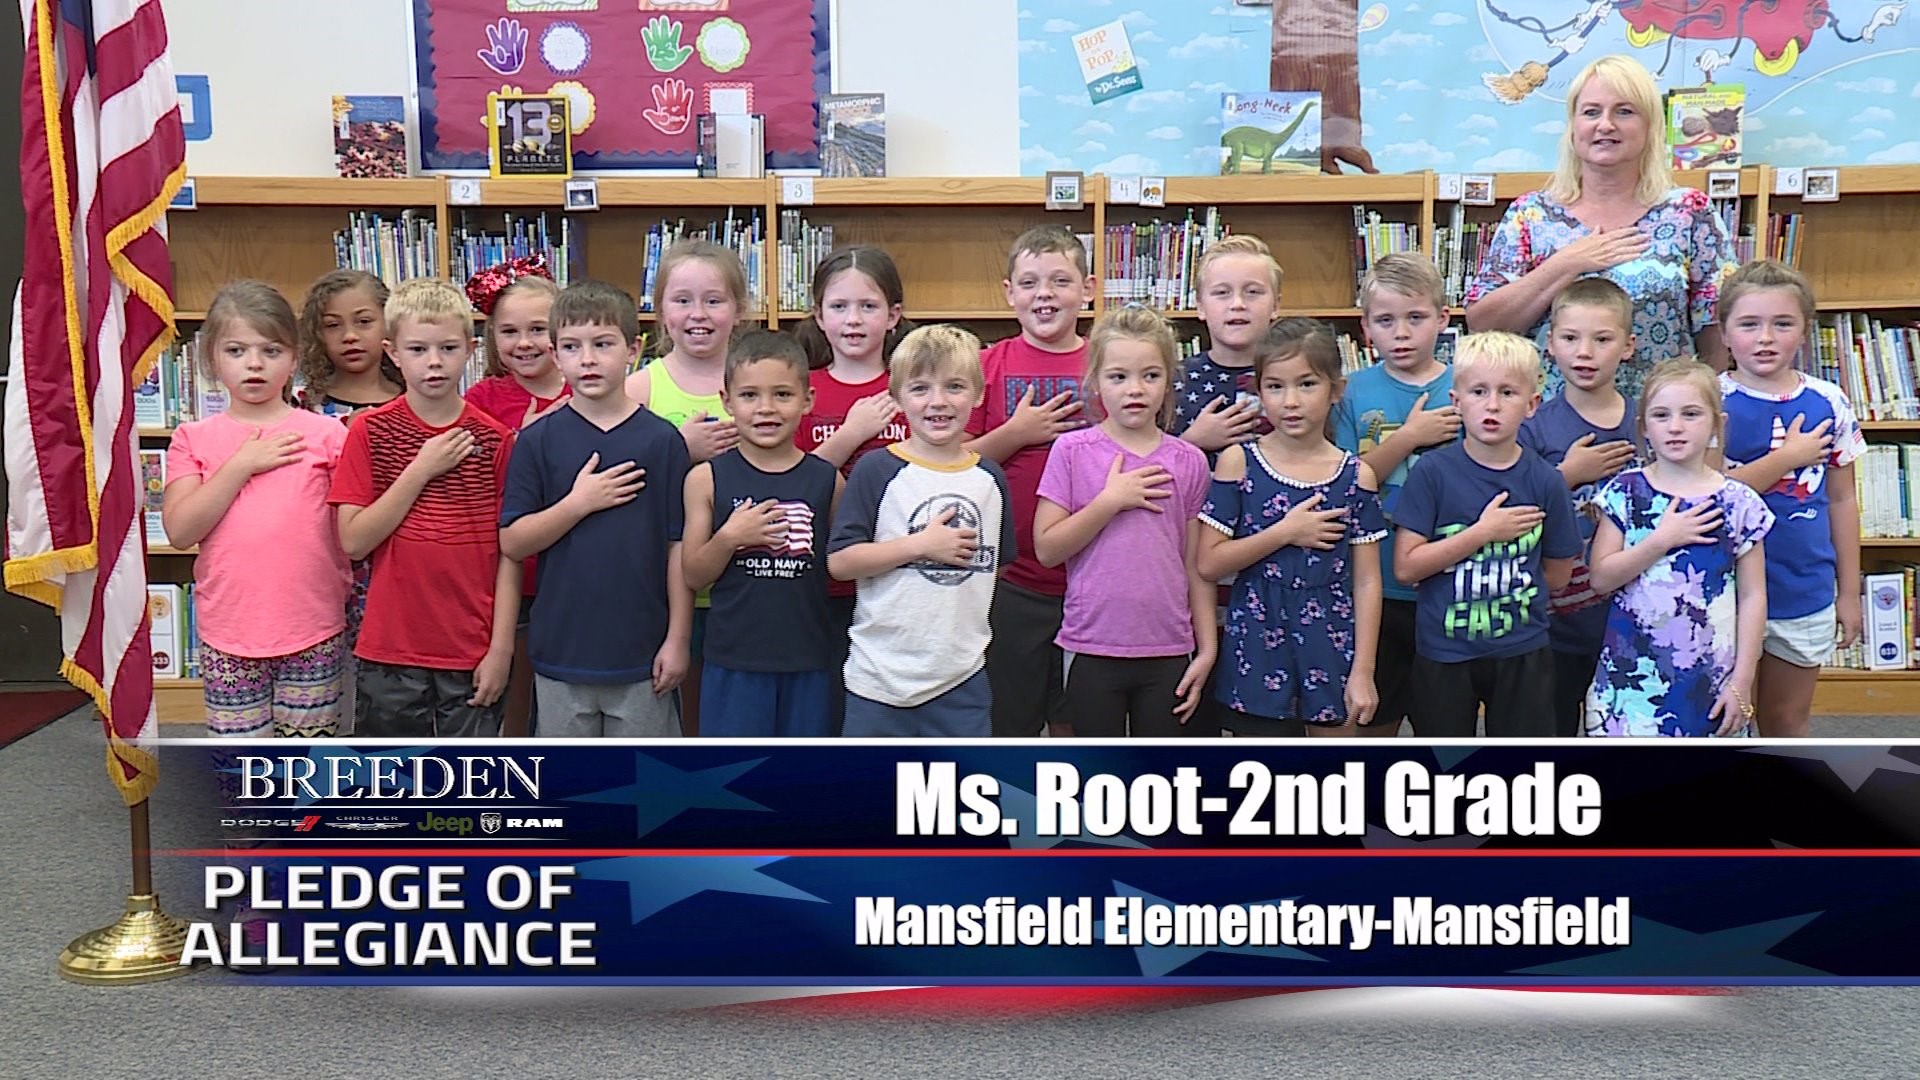 Ms. Root  2nd Grade Mansfield Elementary, Mansfield